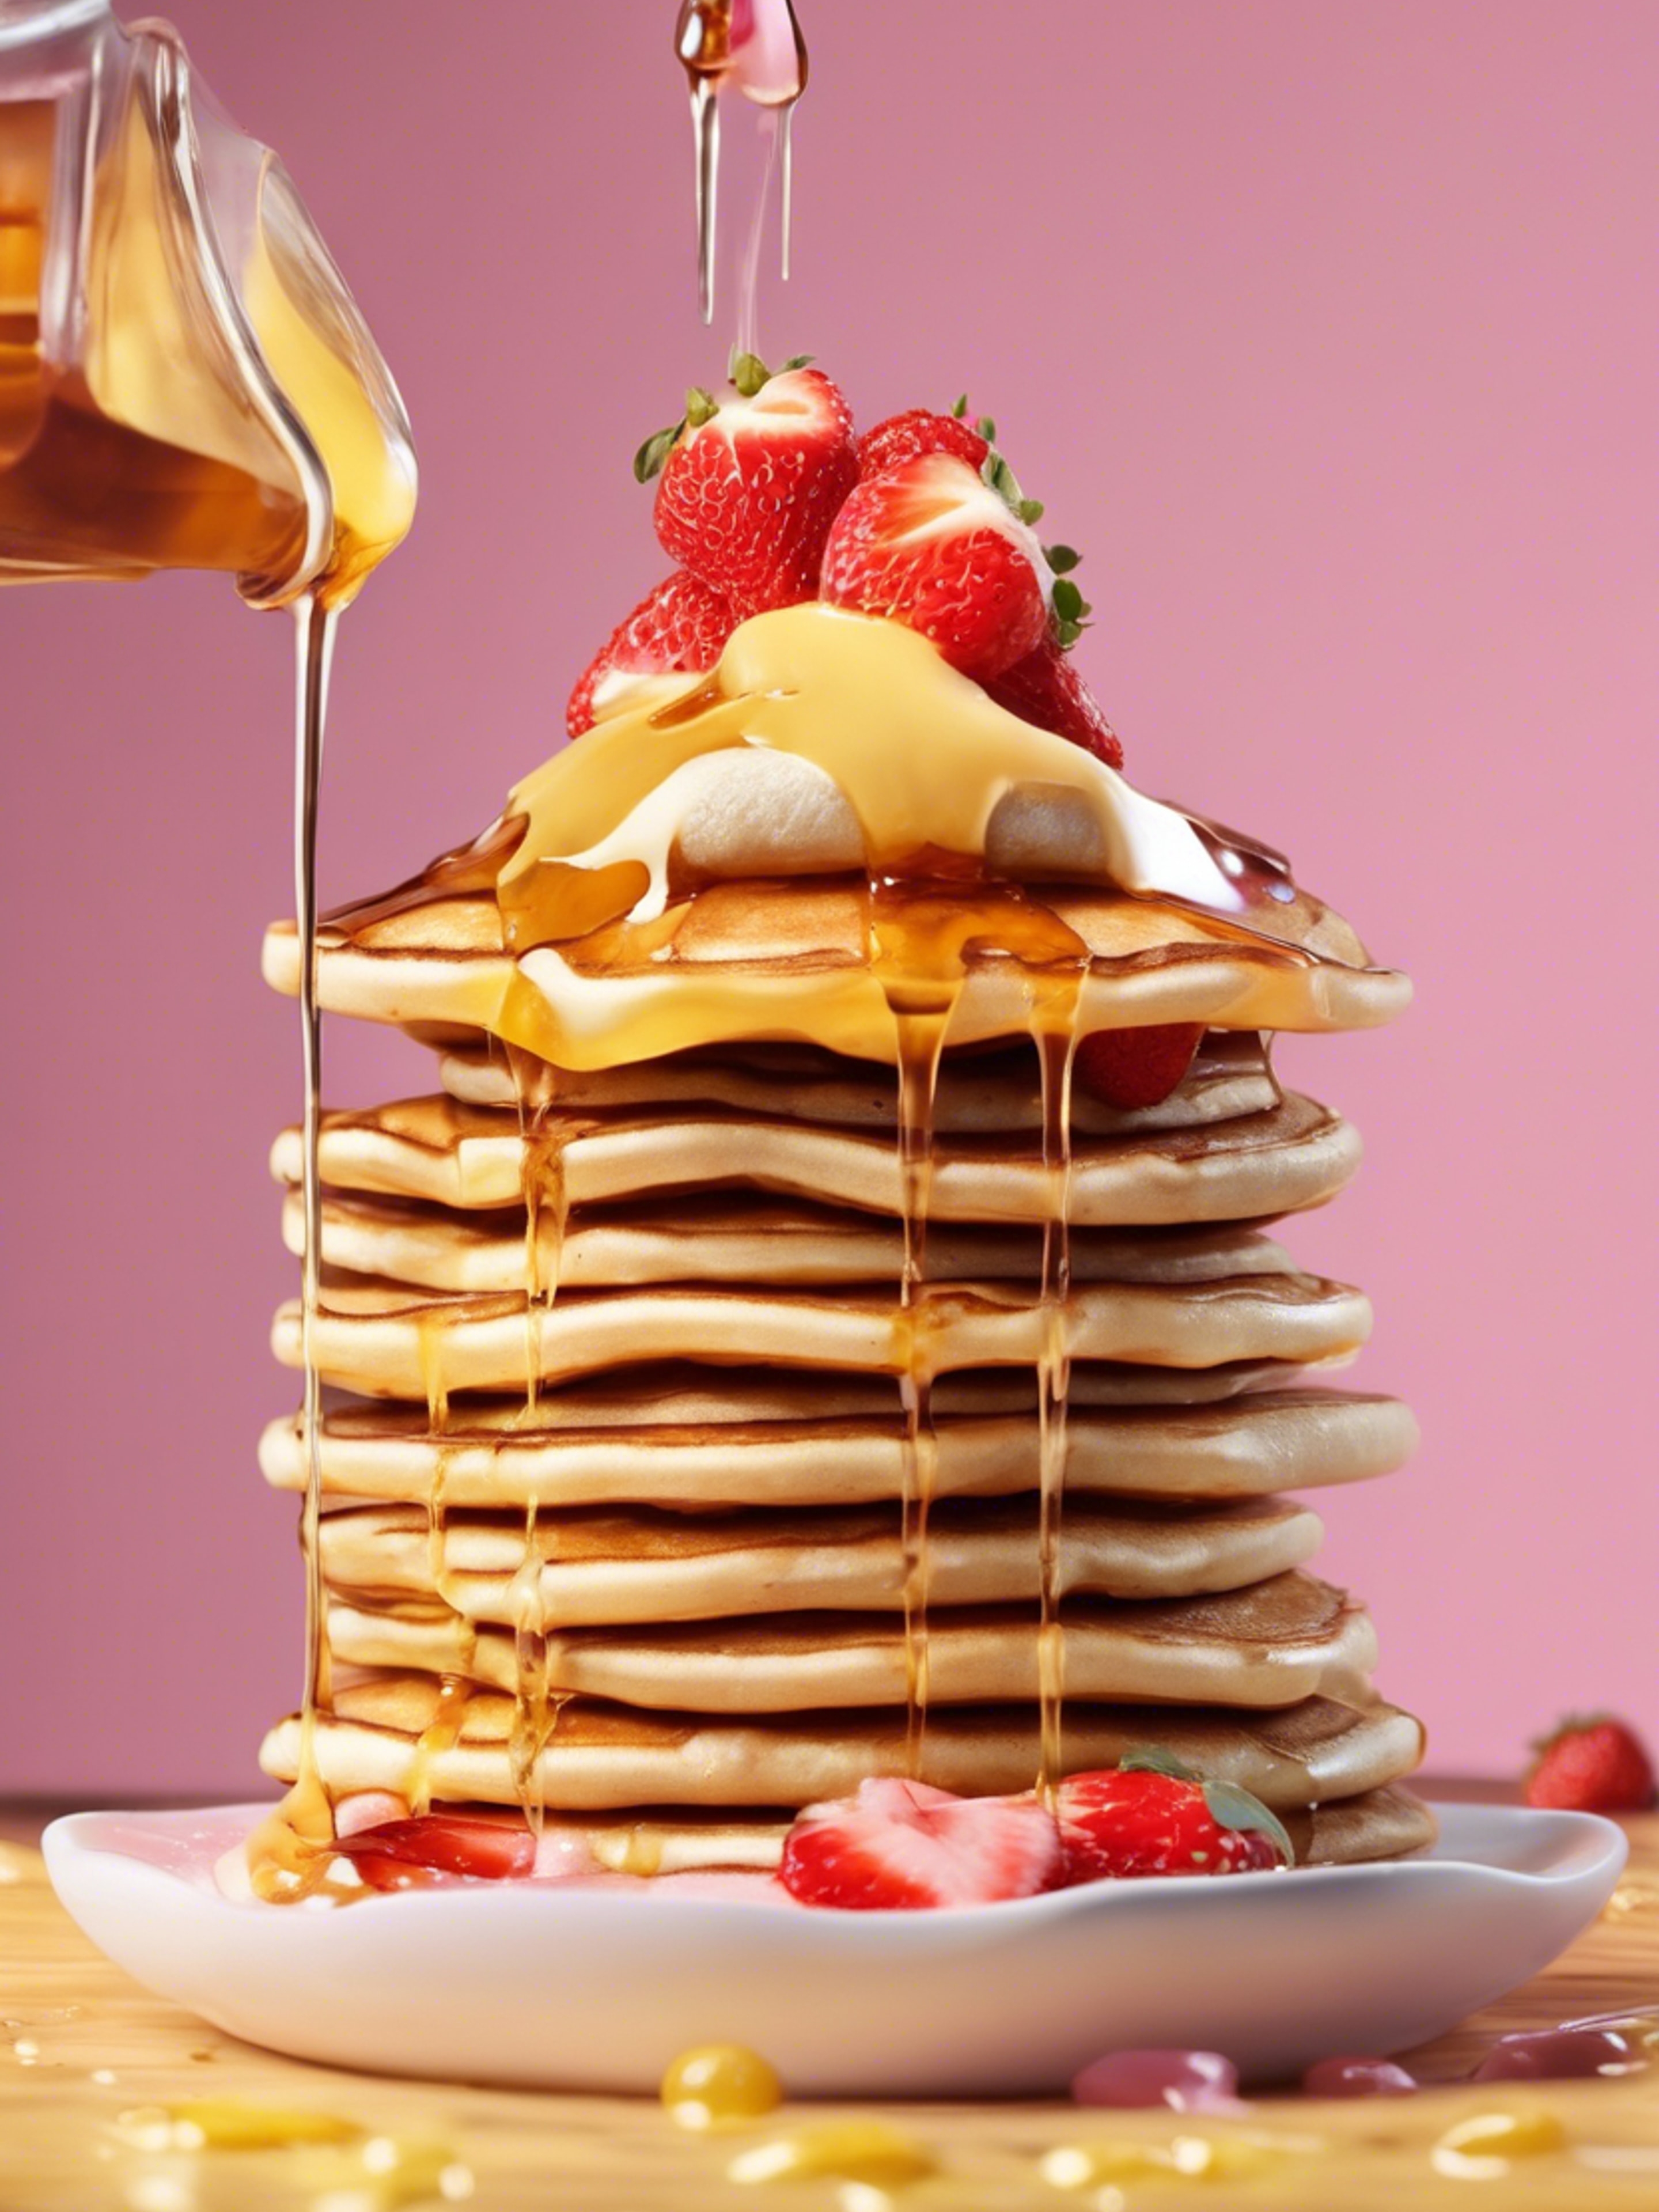 Beige kawaii pancakes stacked with a melted butter and syrup, topped with mini strawberry slices. کاغذ دیواری[6cf29e03a904430684e0]